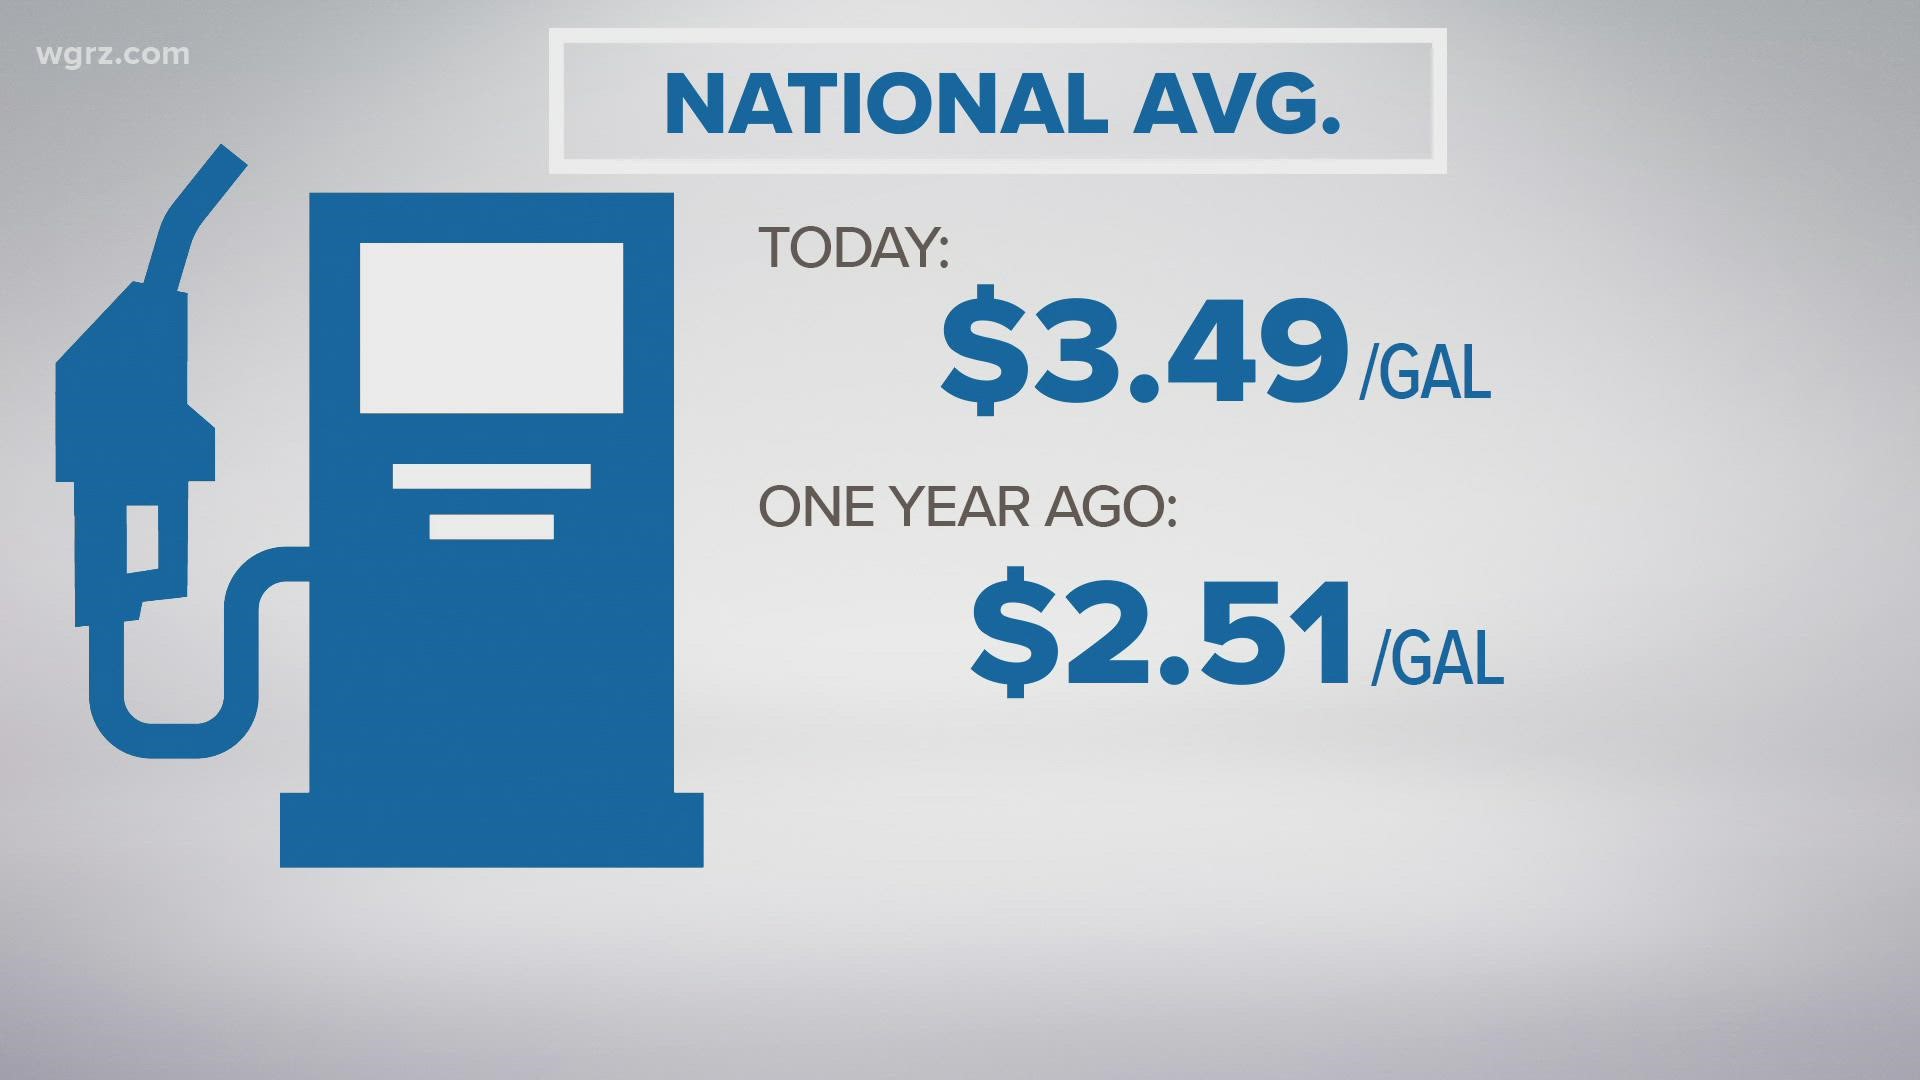 According to Triple-A, the national average is now at $3.49, compared to $2.51 a year ago.